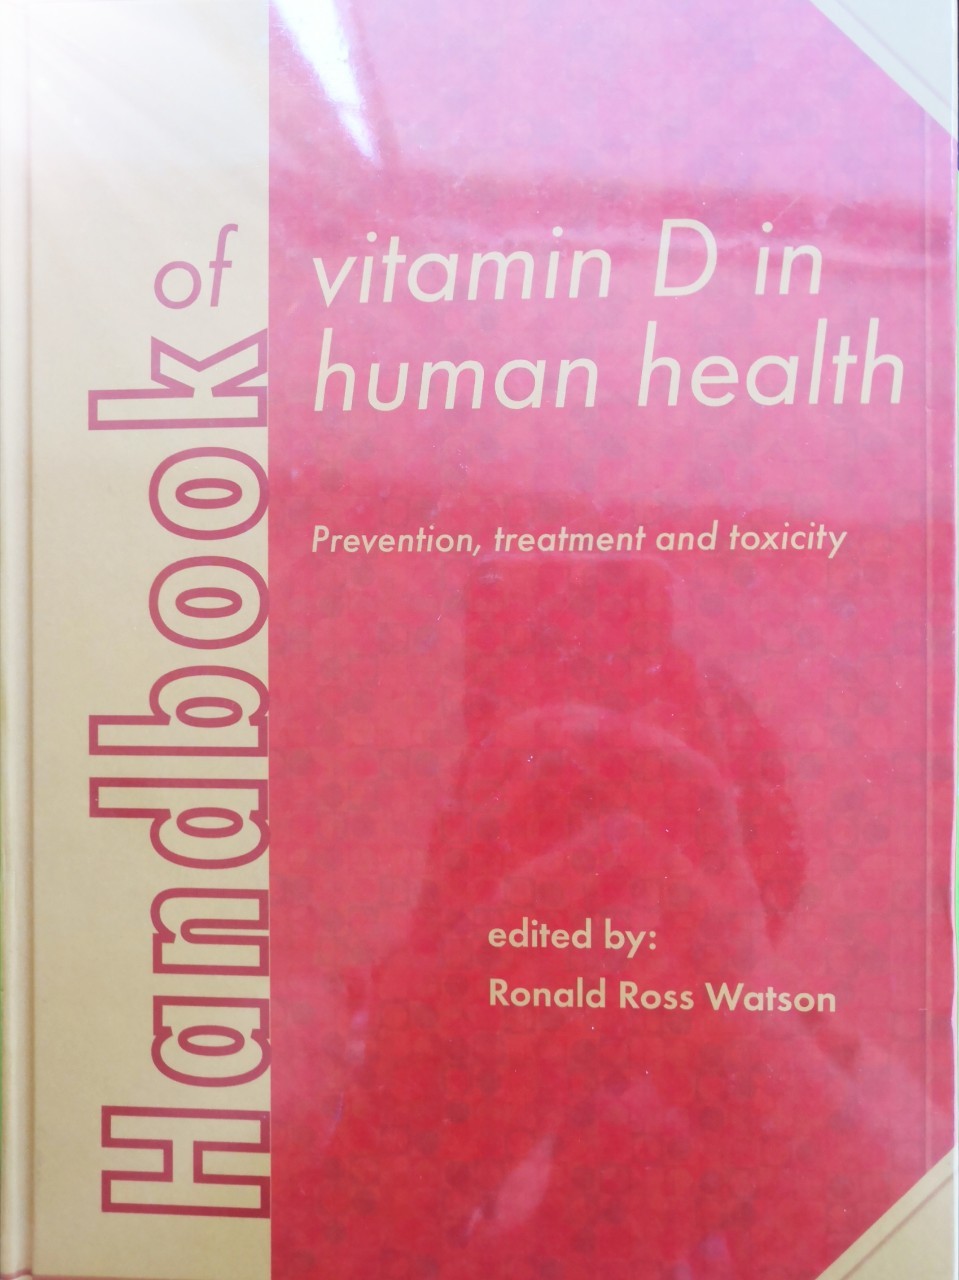 HANDBOOK OF VITAMIN D IN HUMAN HEALTH: PREVENTION, TREATMENT AND TOXICITY (HARDCOVER)-Author: Ronald Ross Watson-Ed: 1/PubYear: 2013-ISBN: 9789086862108